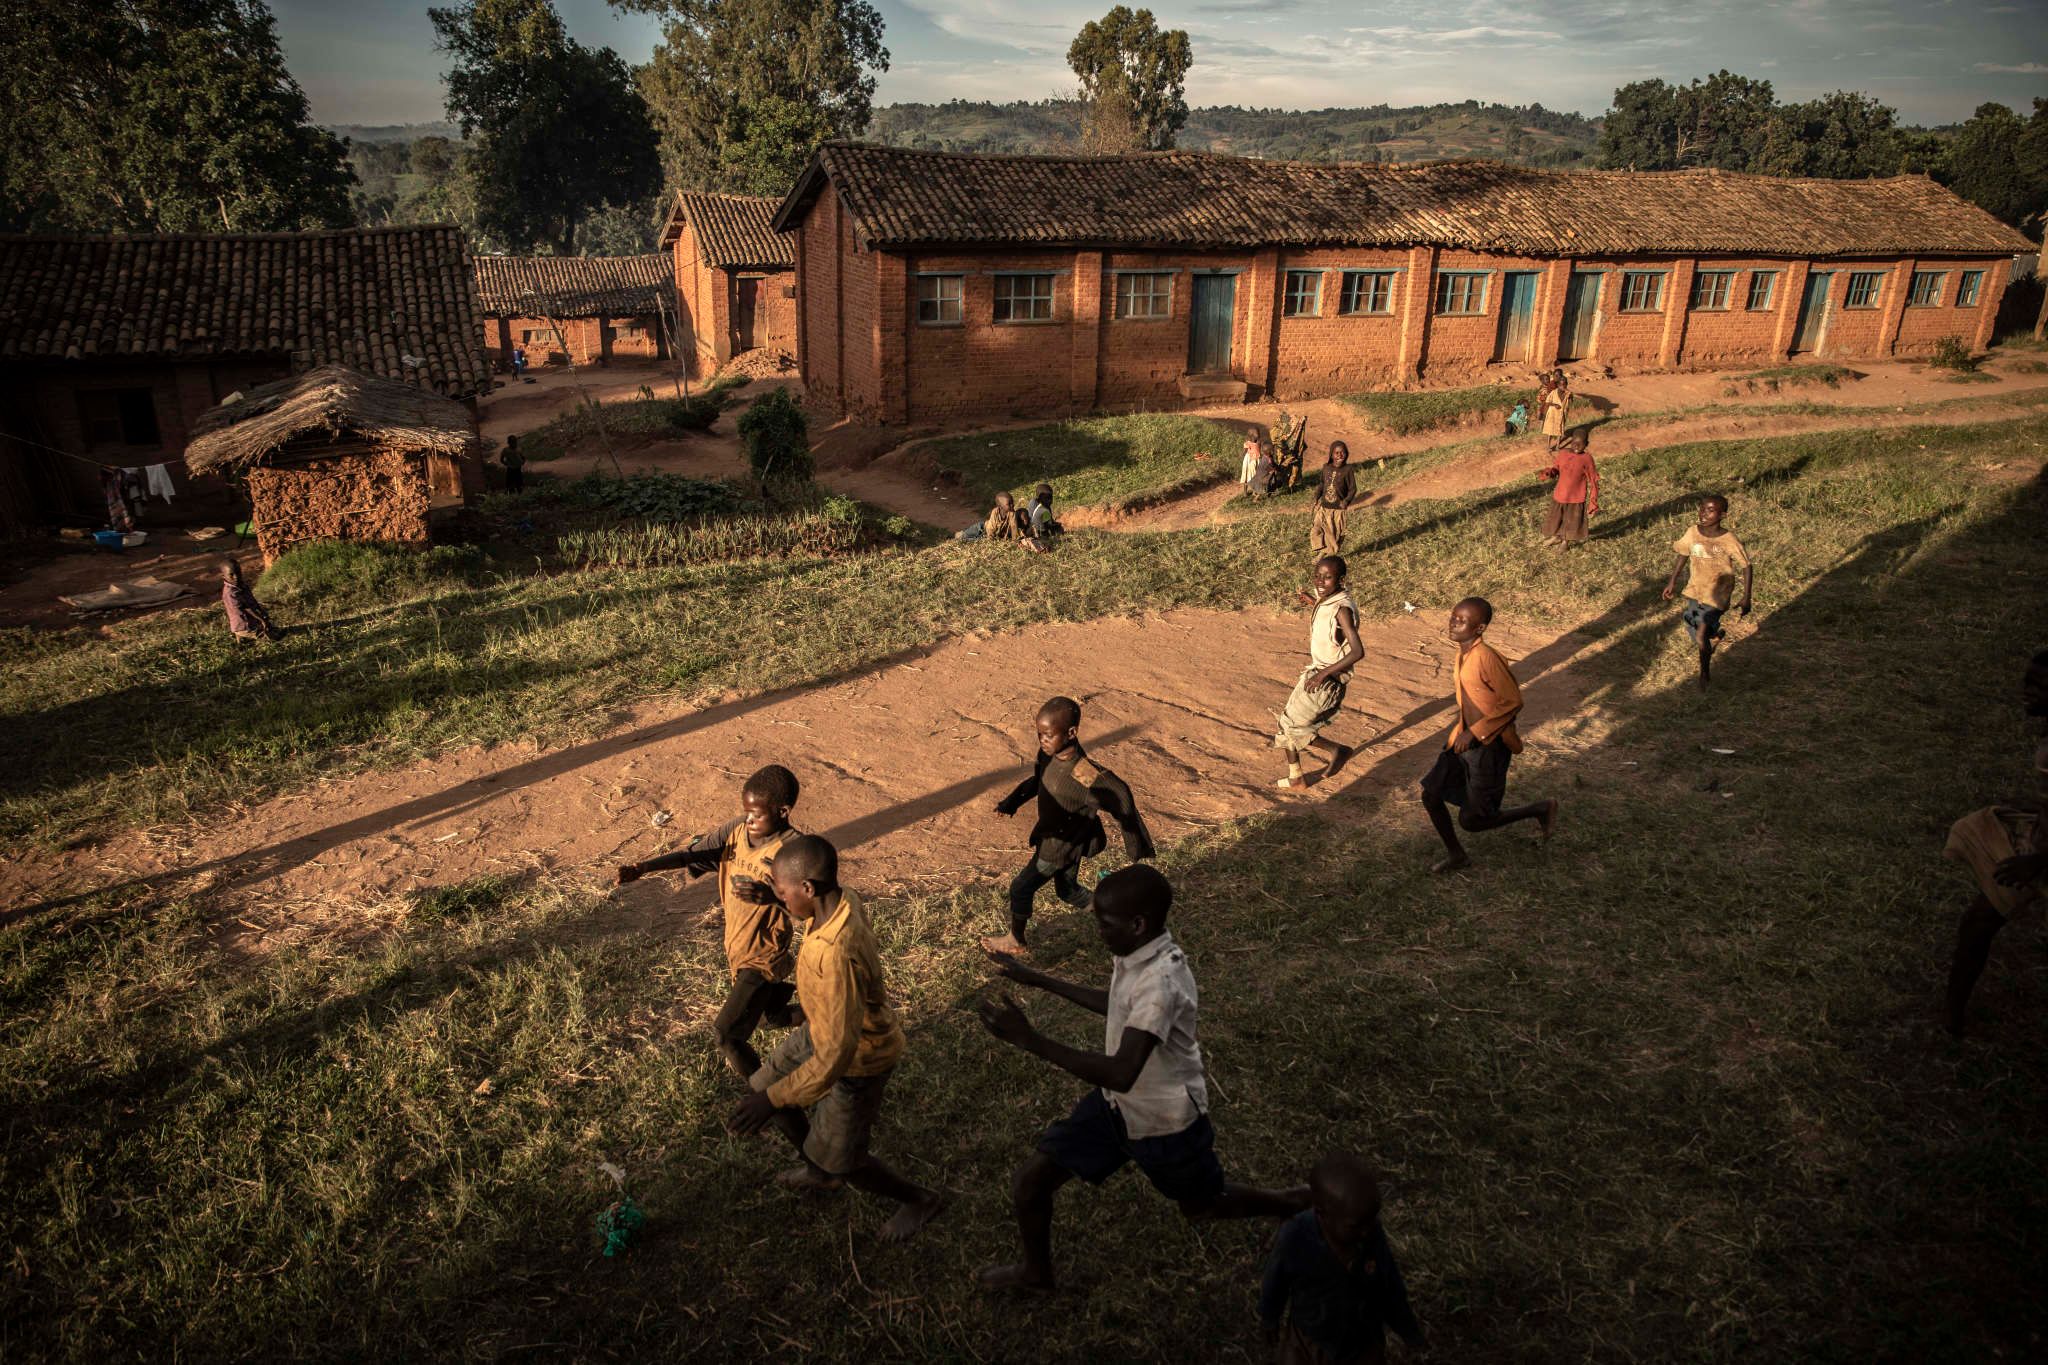 Drodro, Ituri Province, March 2021. Displaced children play soccer beside the Catholic Church. Violence has been endemic in Congo’s mineral-rich eastern regions since the official end of the civil war in 2003, but insecurity has soared in the past two years. On May 6th 2021, the government imposed a state of siege to try to end the bloodshed. A surge in attacks by armed militias and inter-communal violence in the east have killed more than 1, 500 people since 2017 as government troops and U.N. peacekeepers struggle to stabilize the situation. The violence has fuelled a humanitarian crisis with more than 1.6 million people displaced in Ituri out of a total population of 5.7 million people, UNICEF said in April. Some 2.8 million people there are in need of some form of emergency assistance, it said also.